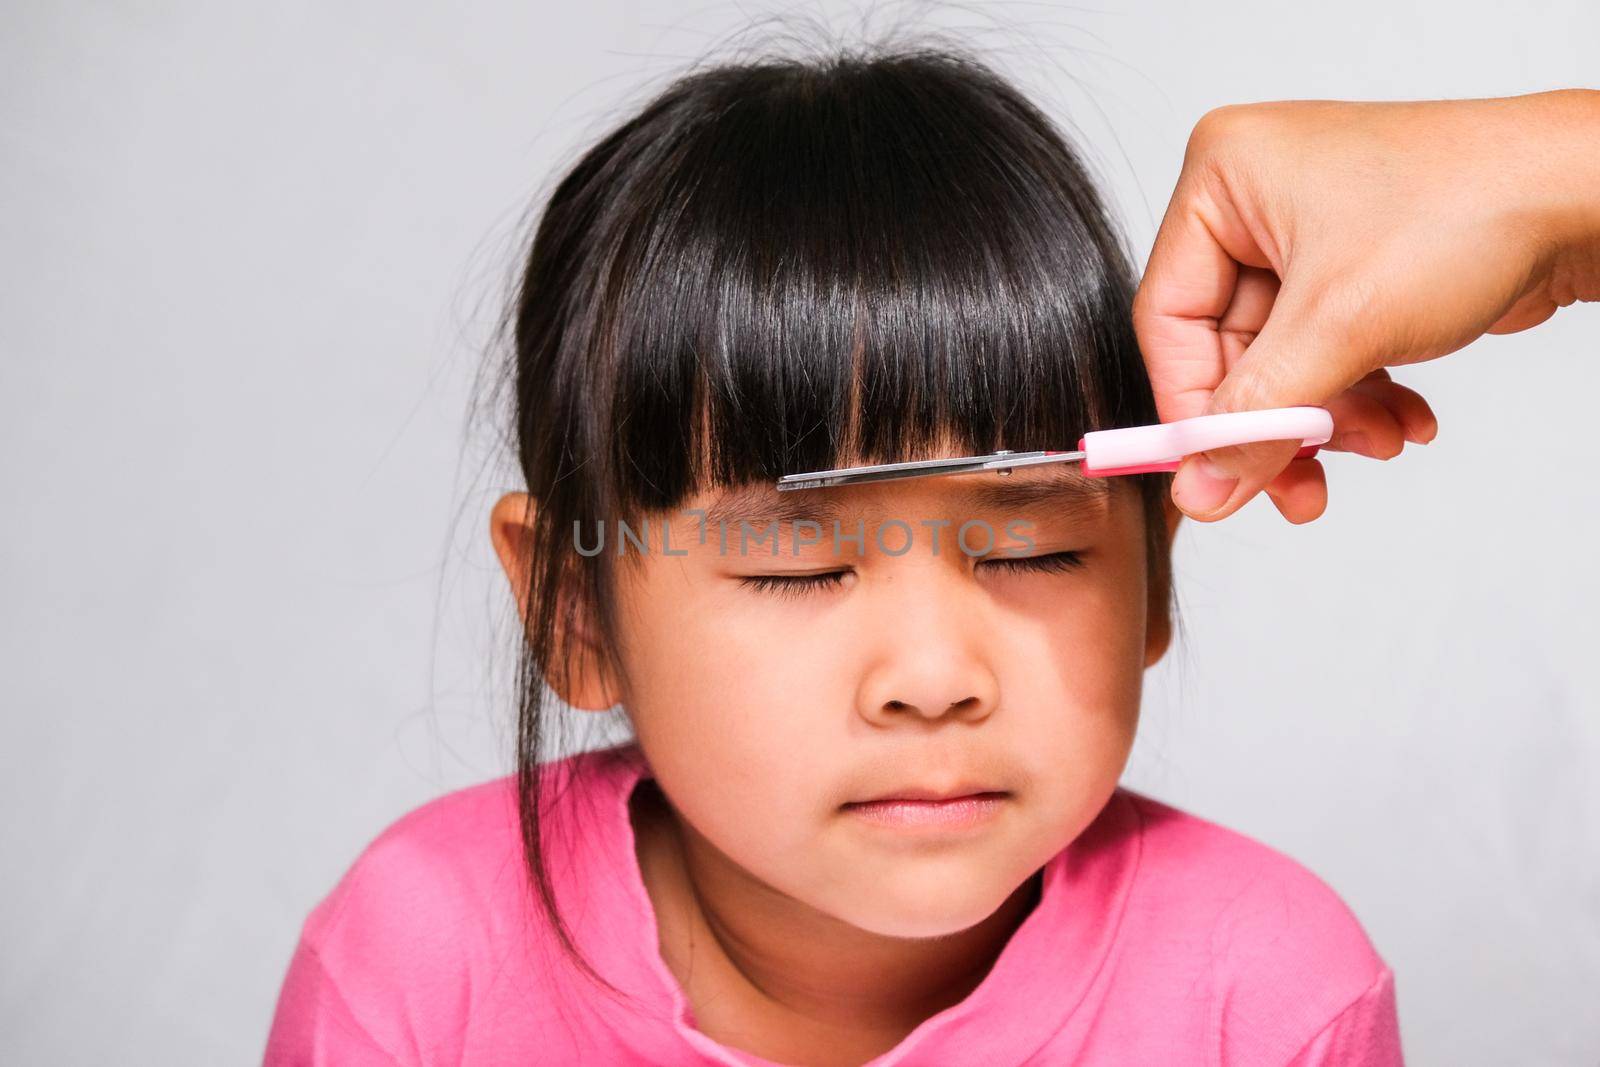 Asian mother cuts her daughter's hair by herself at home. Mom cuts hair for a cute little girl. Stay home safe from corona virus Covid-19 by TEERASAK